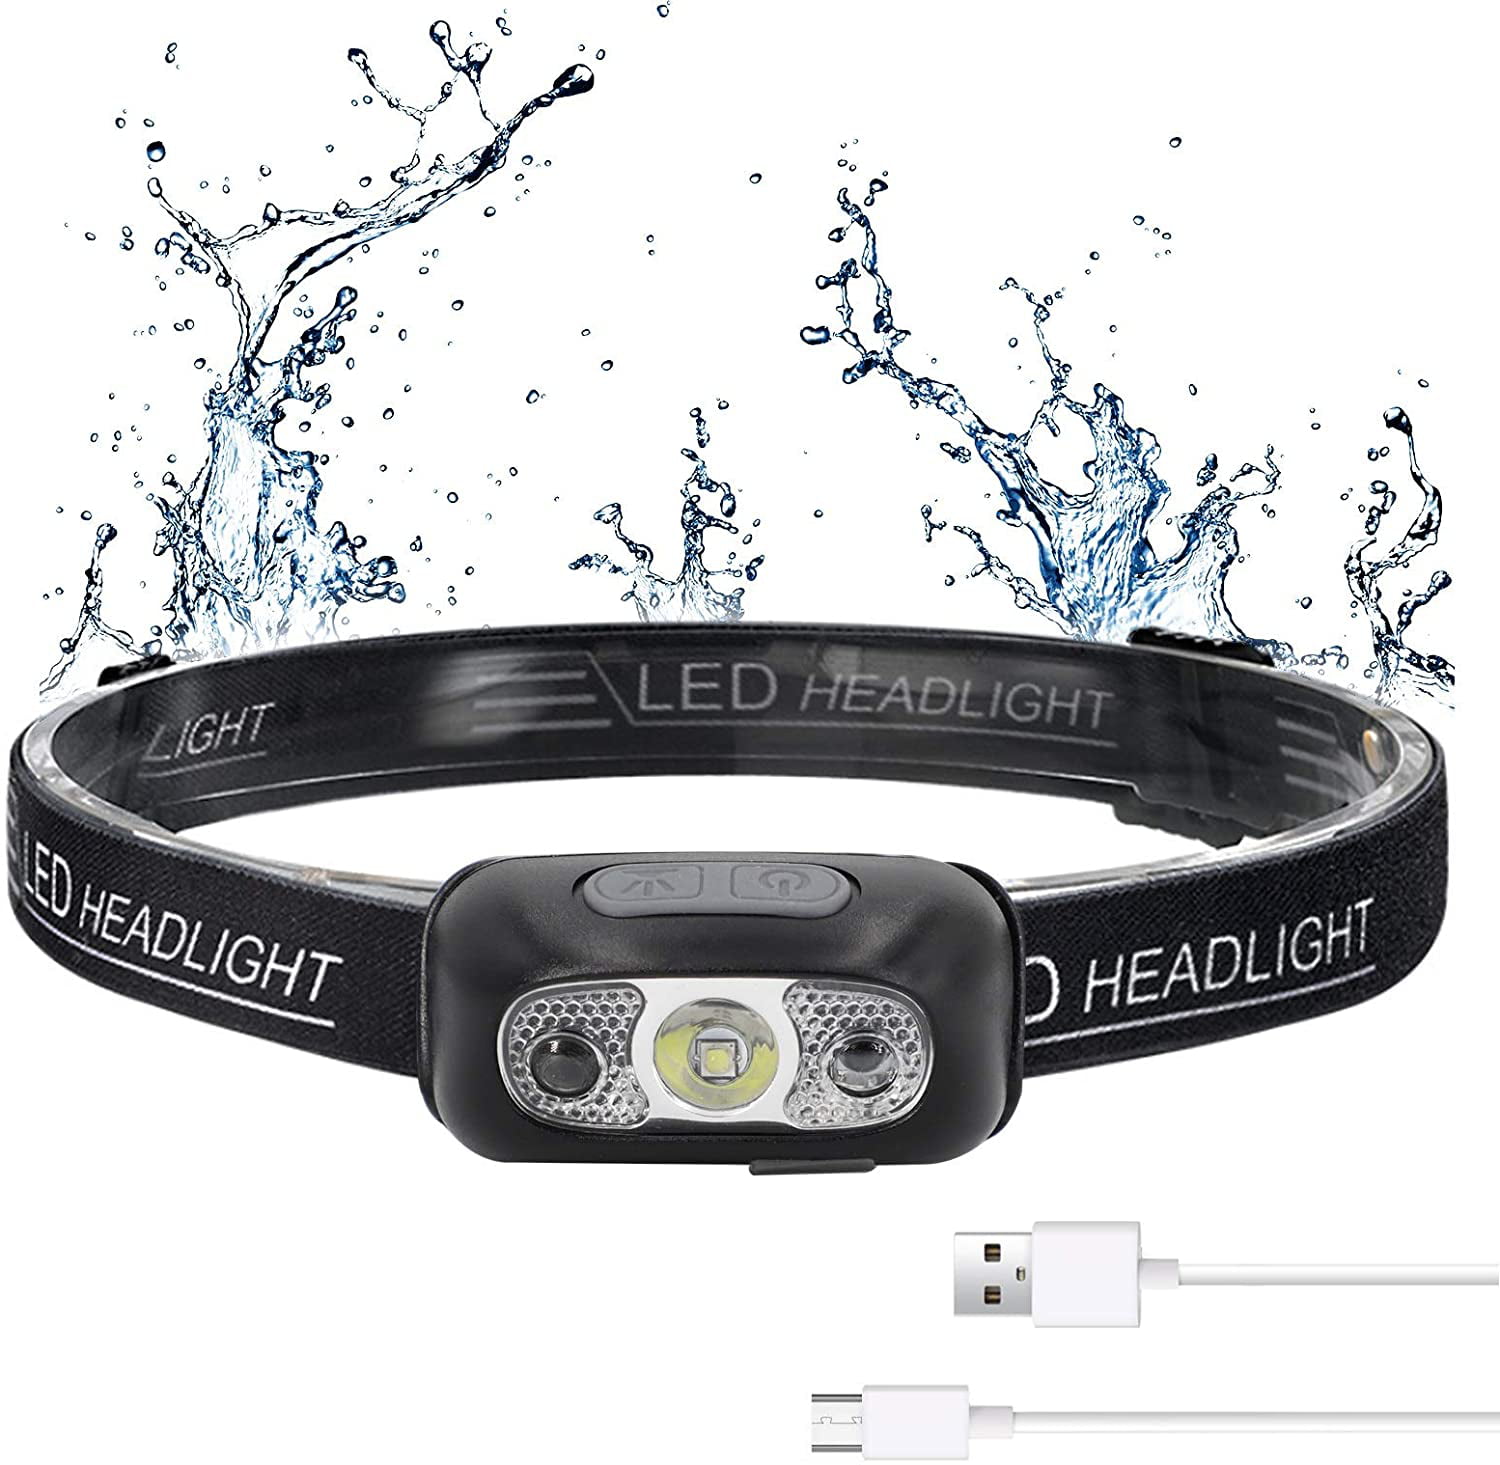 Details about   350000LM LED Headlamp 5X USB Rechargeable Headlight Head Torch Flashlight US 